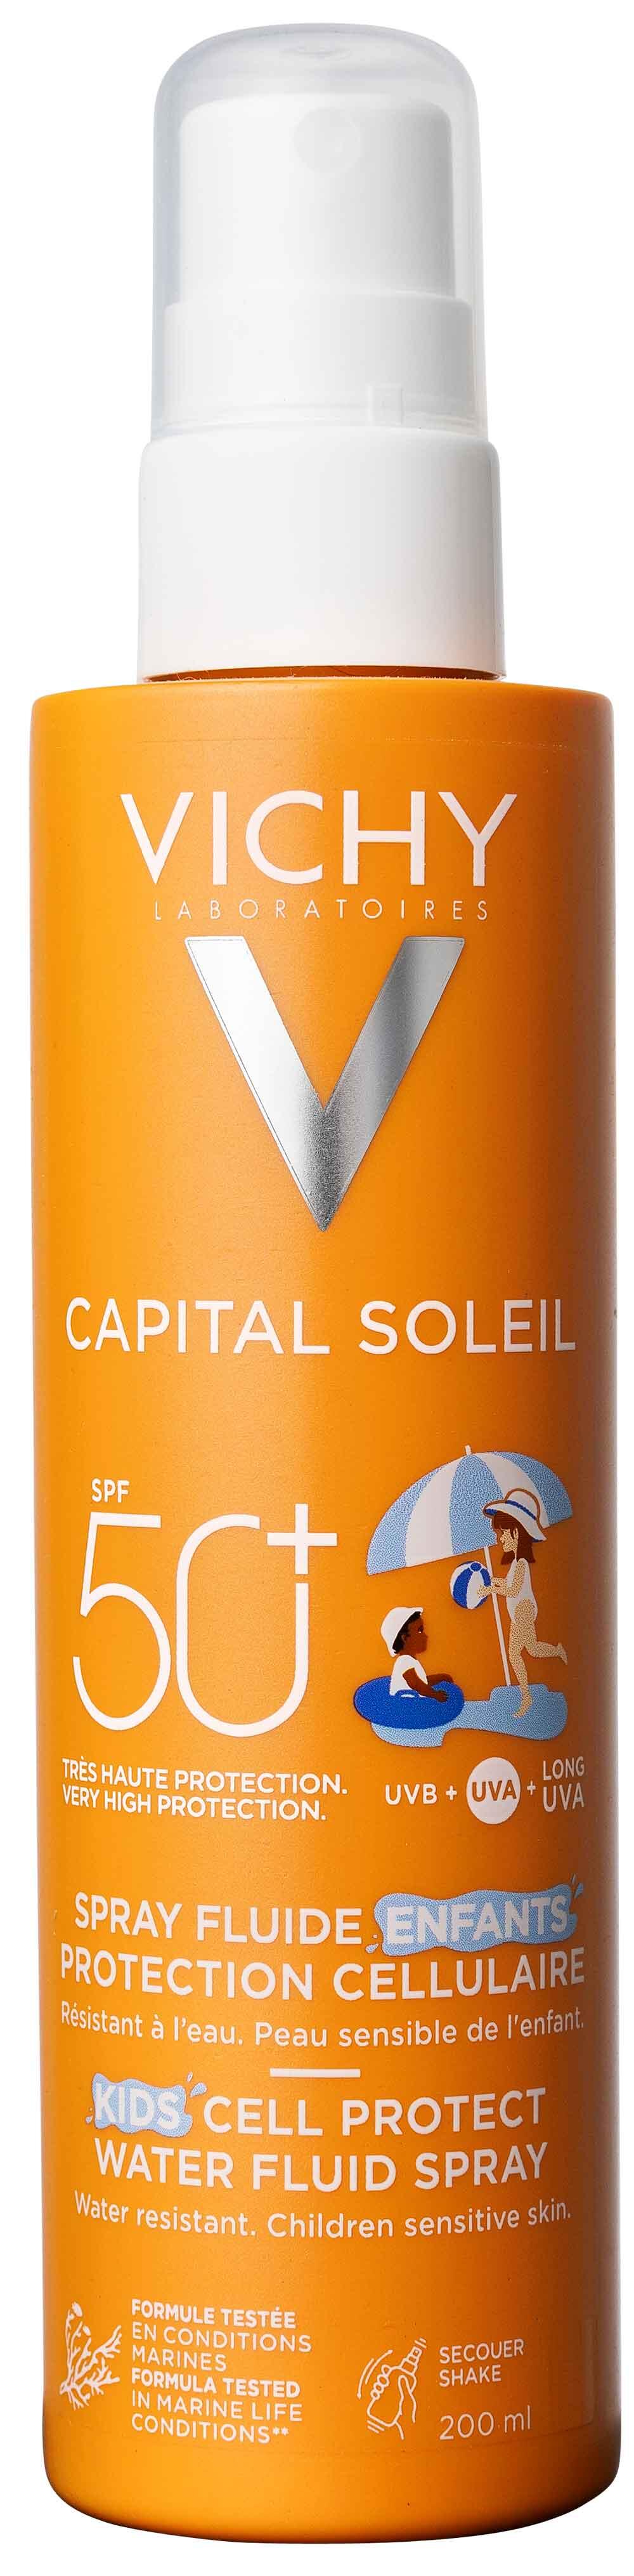 Capital Soleil Kids cell protect water fluid spray SPF 50+ Vichy